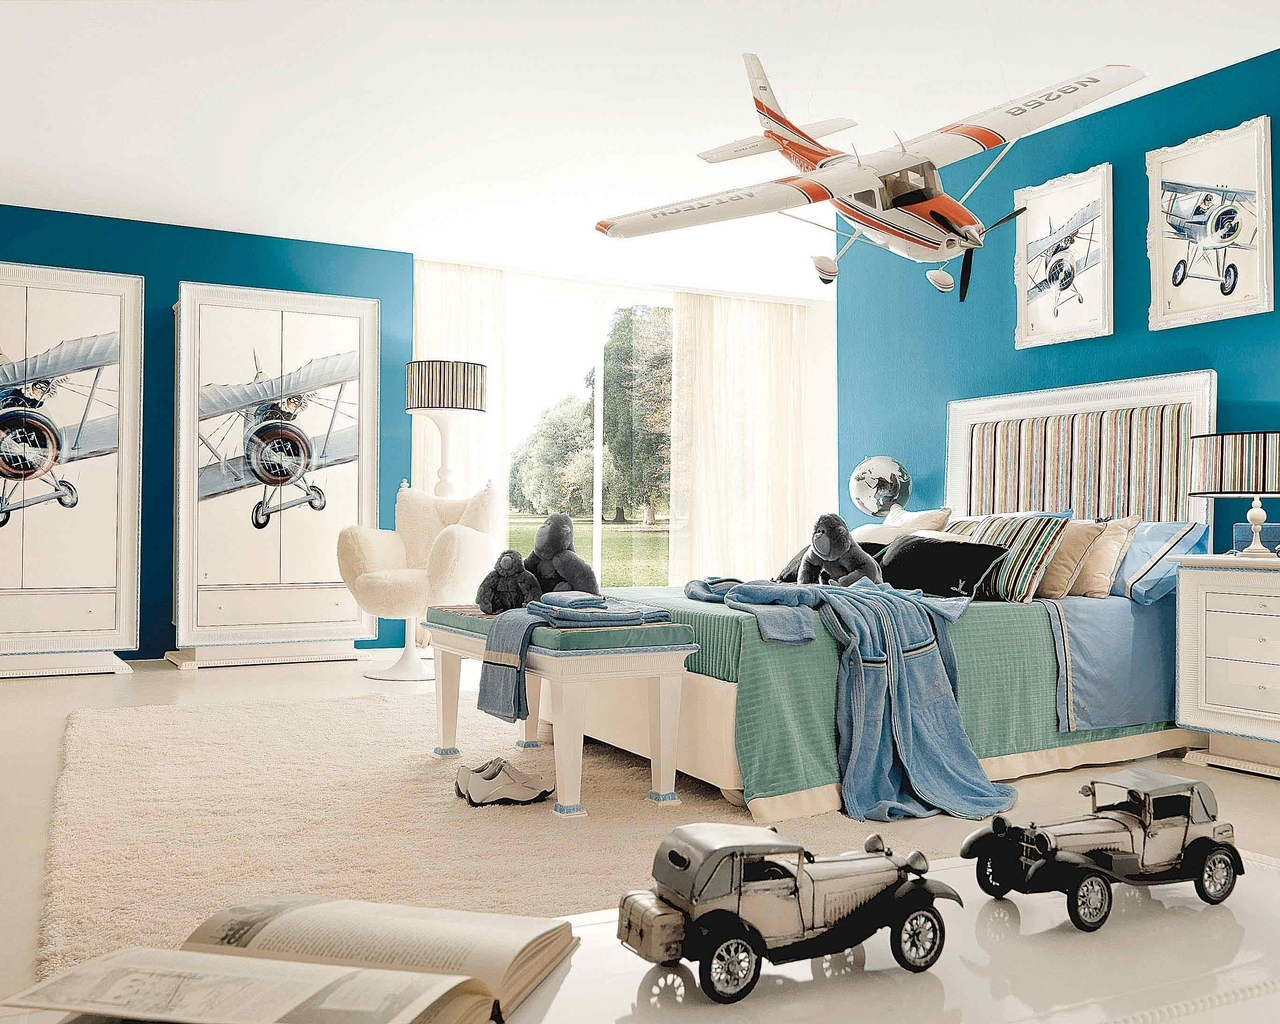 Image: Children's room, bed, carpet, lamp, picture, planes, toys, cars